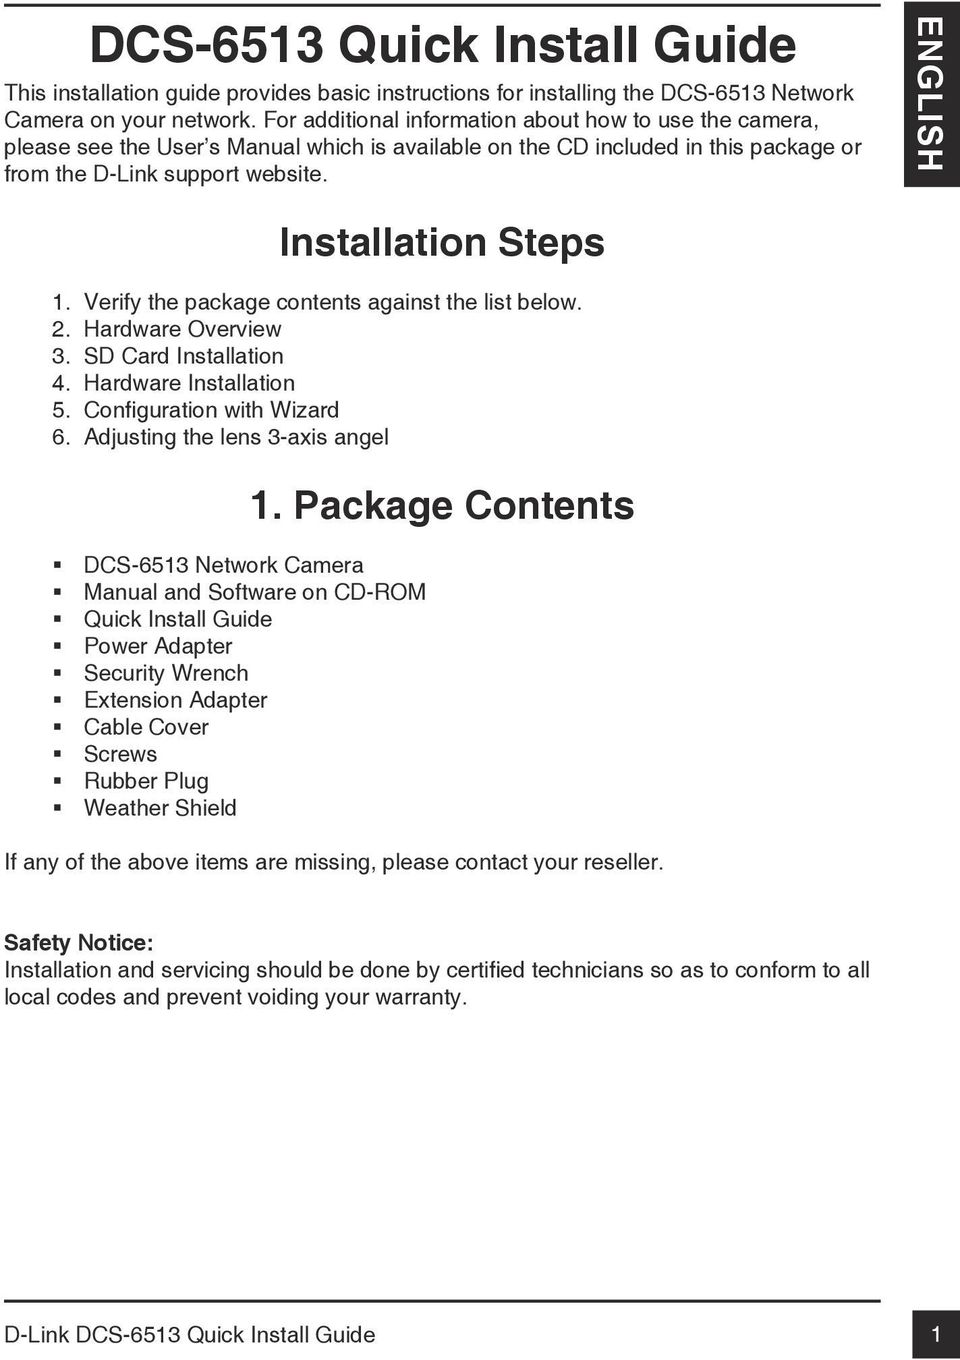 ENGLISH Installation Steps 1. Verify the package contents against the list below. 2. Hardware Overview 3. SD Card Installation 4. Hardware Installation 5. Configuration with Wizard 6.